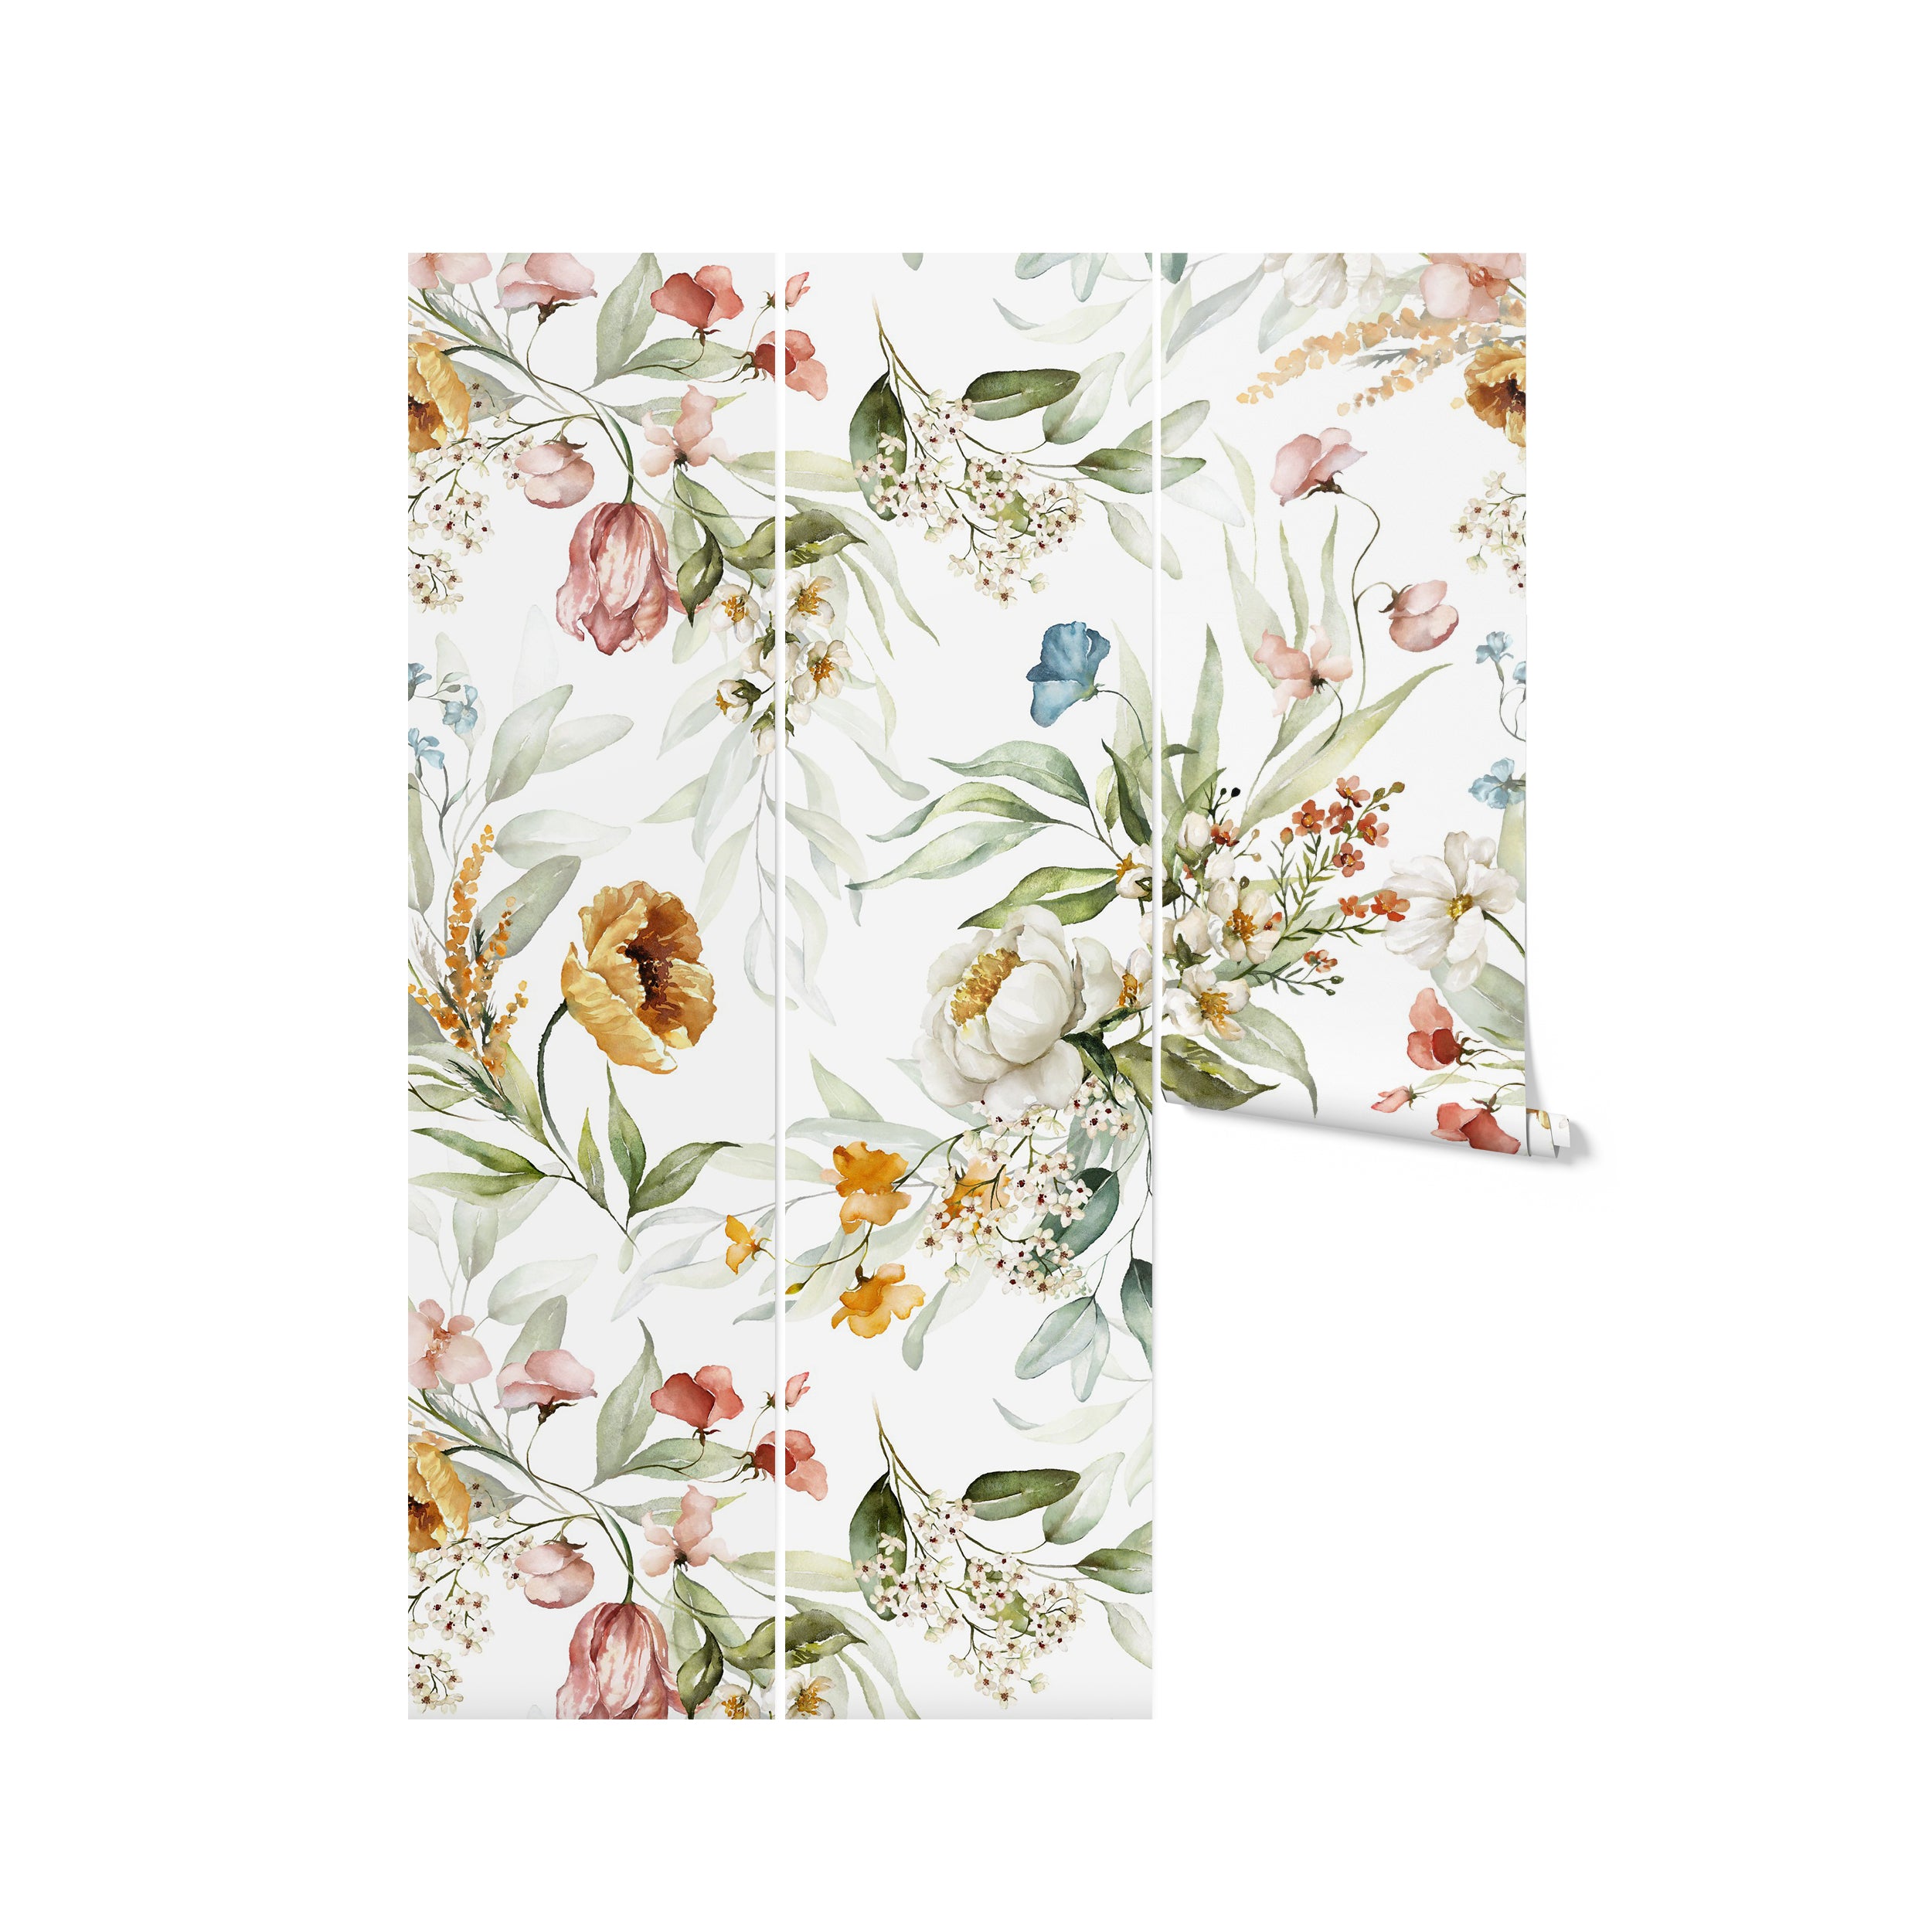 Close-up of the Watercolour Bright Floral Wallpaper displaying an intricate pattern of various flowers and leaves in pastel shades on a white background, adding a touch of elegance and freshness.